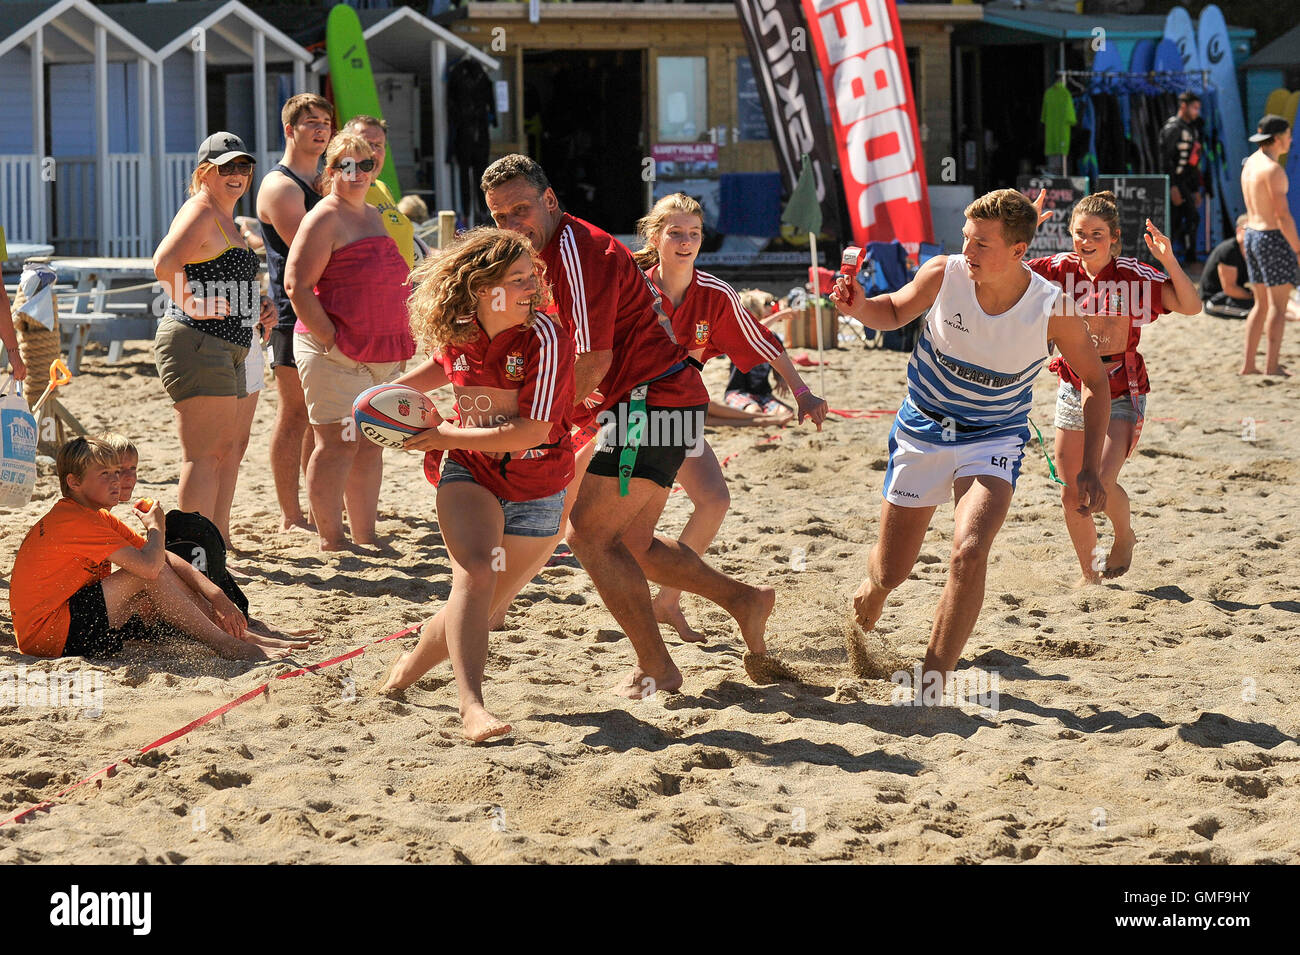 Newquay, UK. 26th Aug, 2016. Lusty Glaze, Newquay, Cornwall. 26th August, 2016. Blessed with beautiful sunny weather, The ‘Niftys' battle it out with ‘Newbury Colts' to become the Beach Tag Rugby Champions at the Lusty Glaze annual Bank Holiday event. Photographer Credit:  Gordon Scammell/Alamy Live News Stock Photo